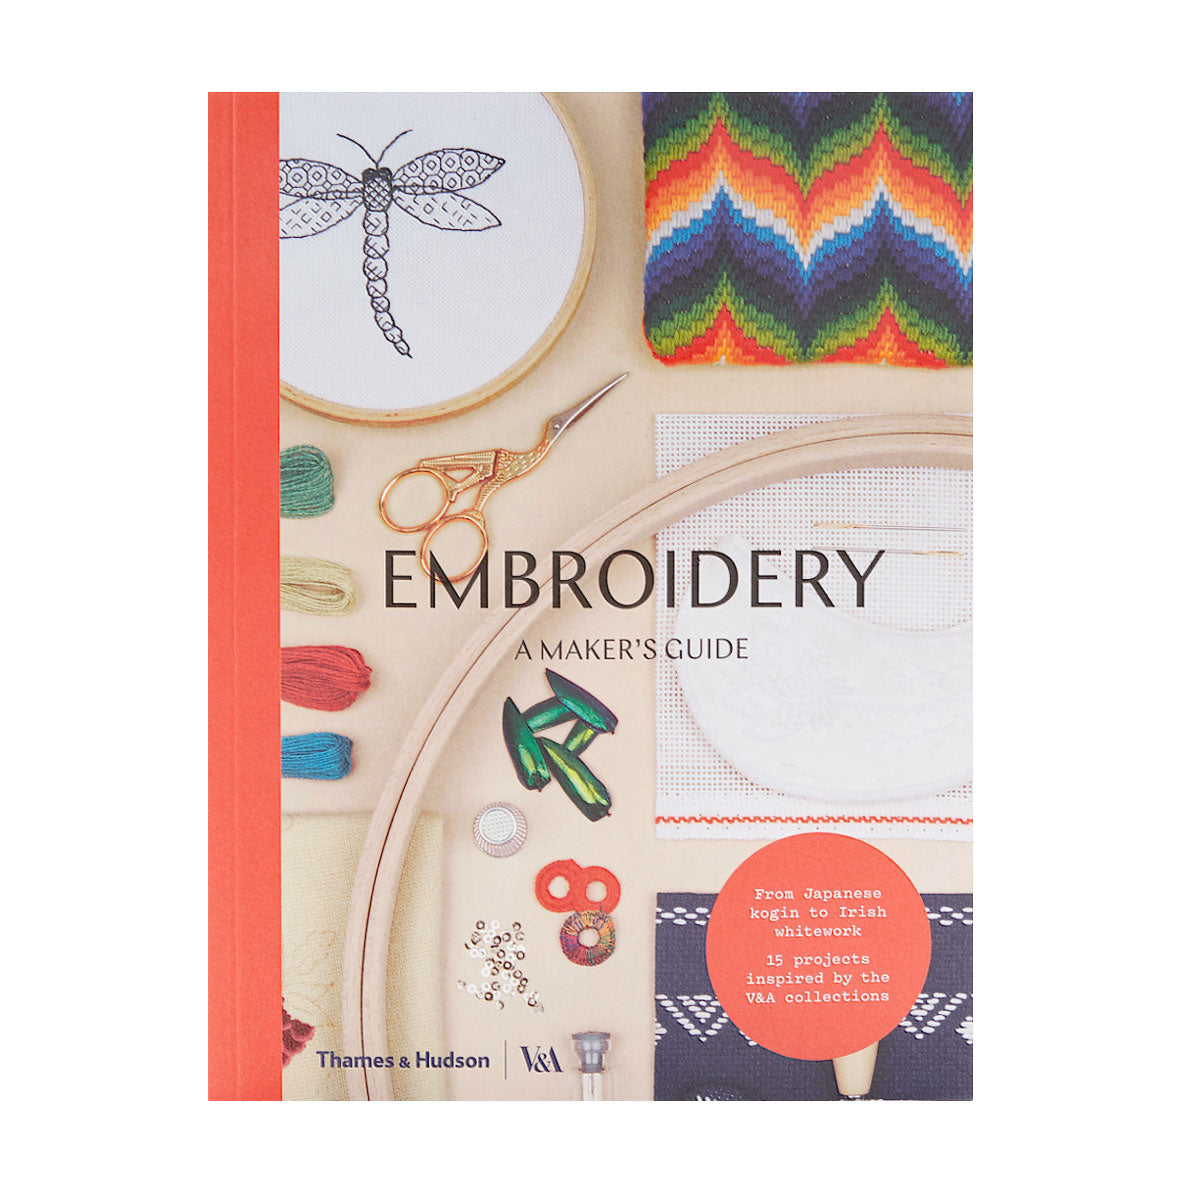 BOOK: Embroidery - A Maker’s Guide (V&A)